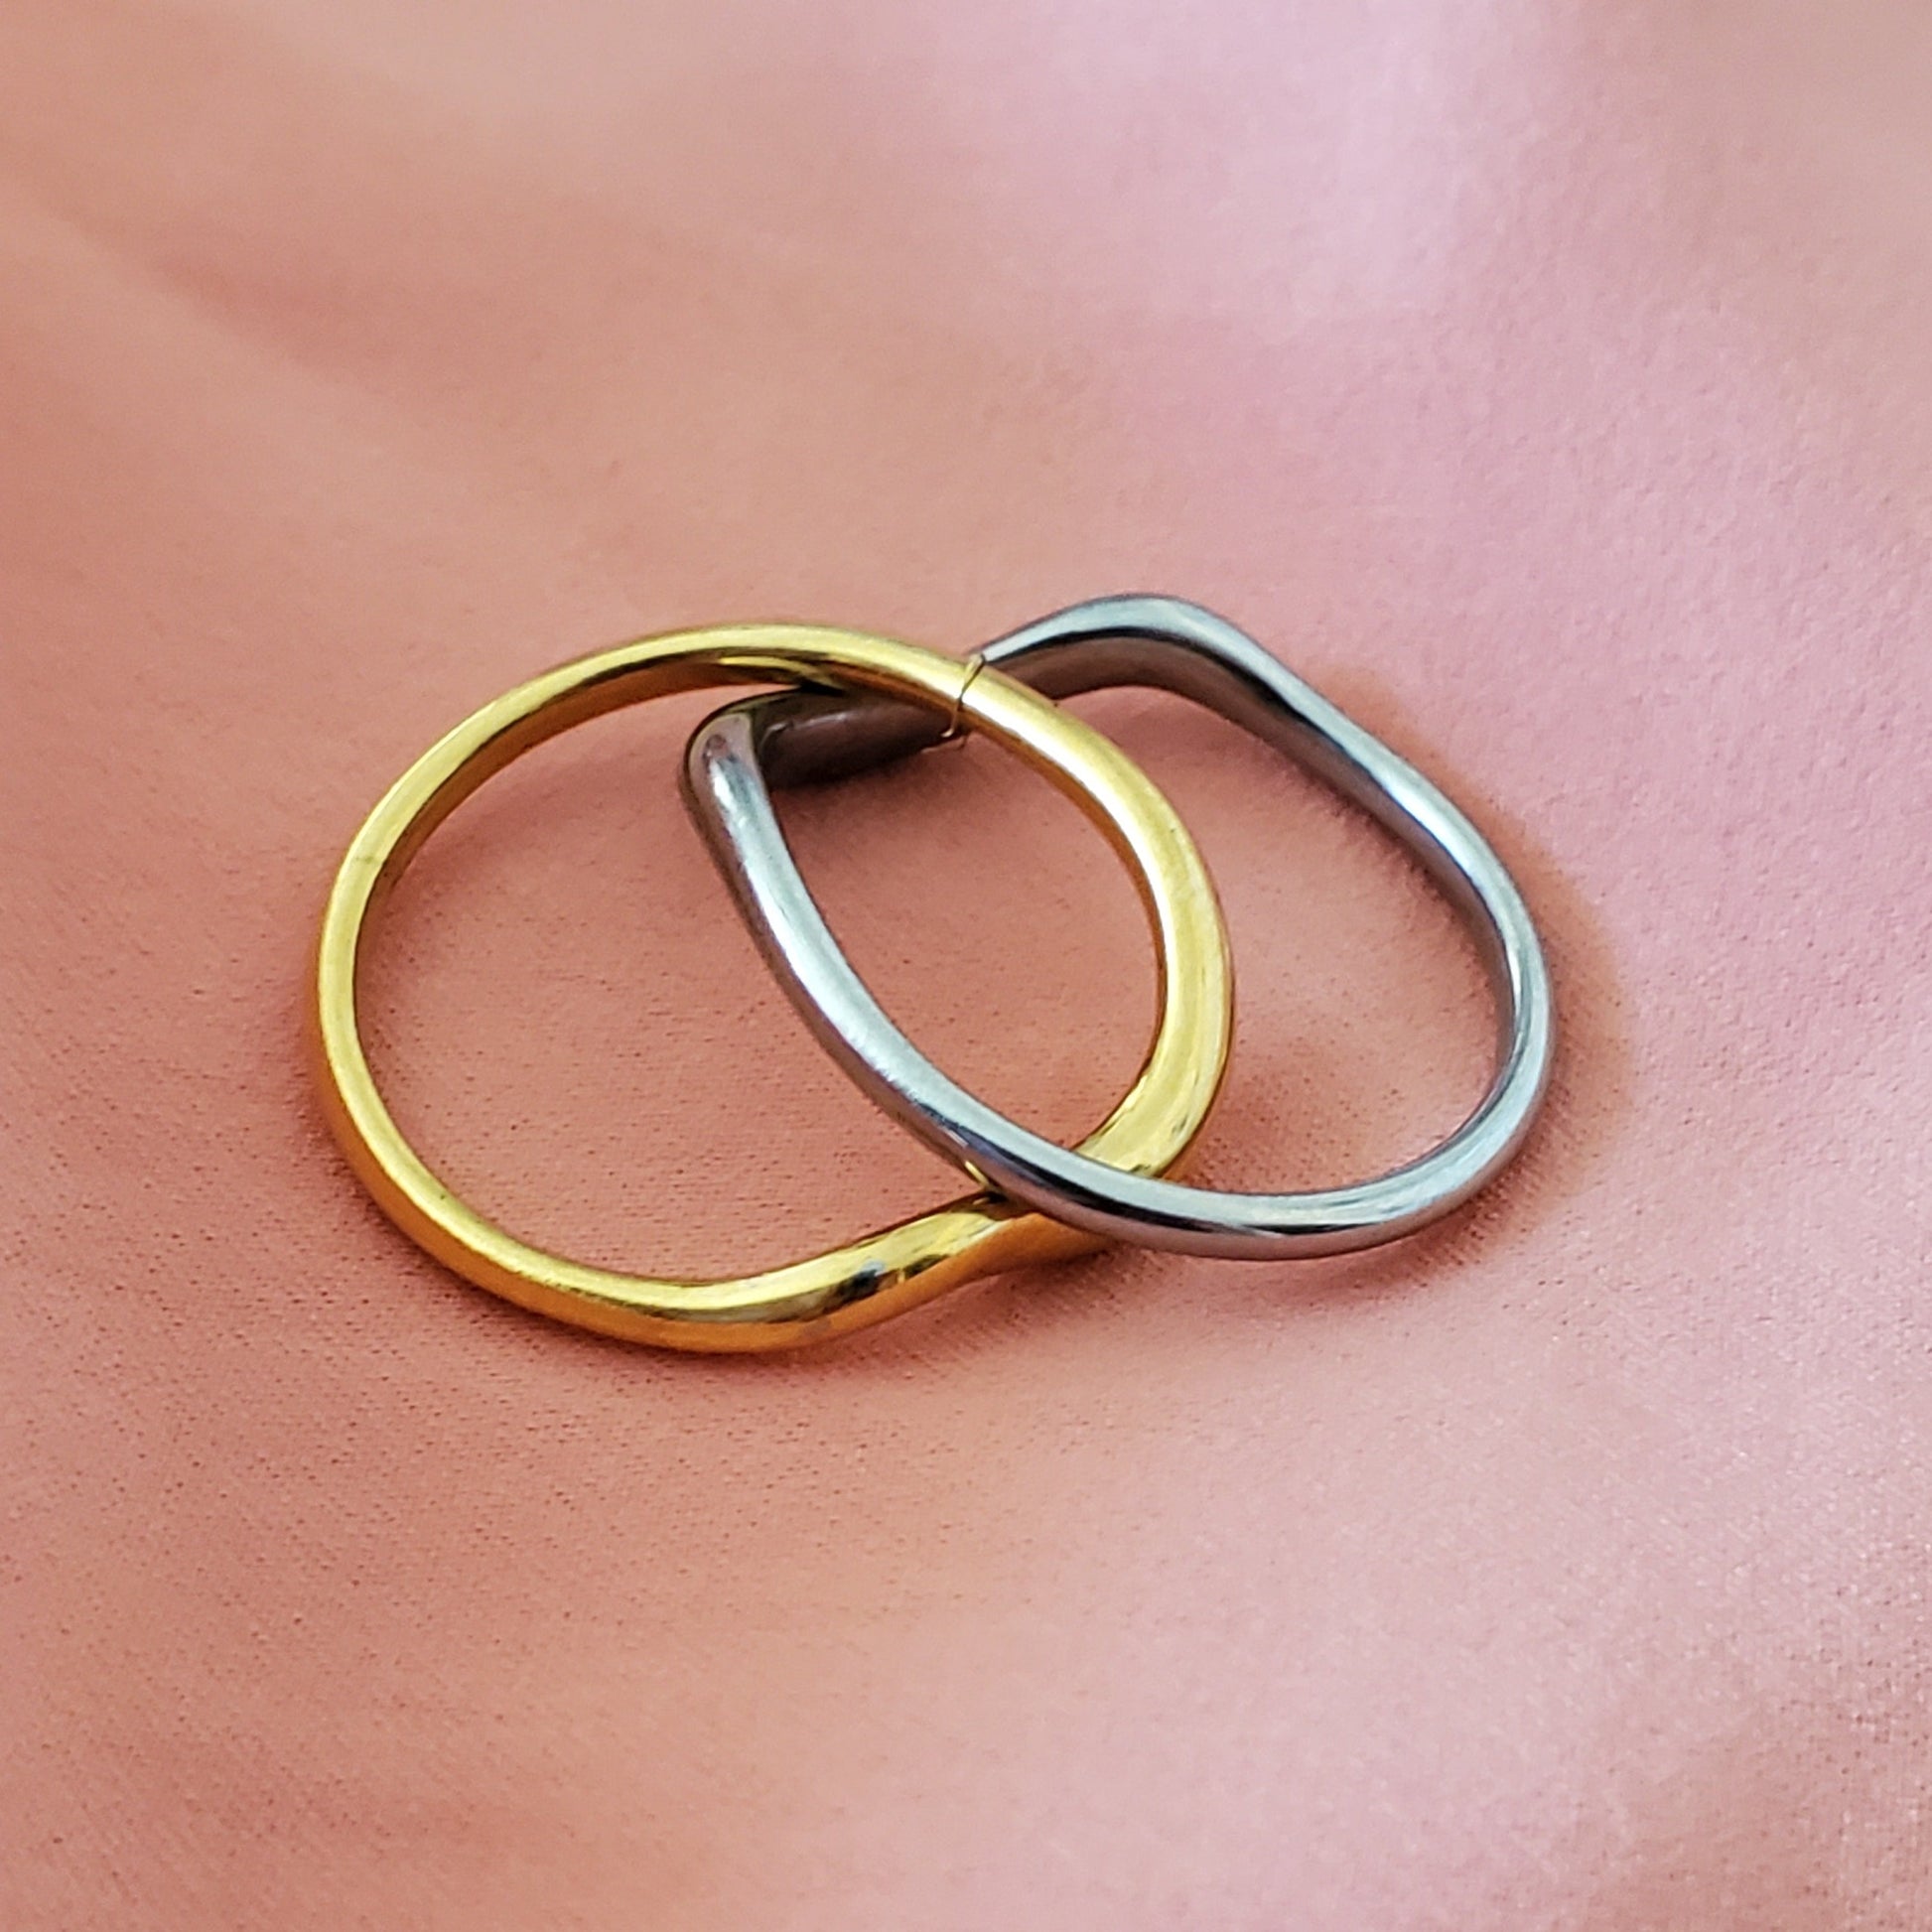 double tone rings, gold and silver rings, hello Luxy jewelry, hey harper jewelry, the views and co jewelry, ellie vail jewelry, 18k gold plated rings, 18k gold plated jewelry, water resistant jewelry, water resistant rings, tarnish free rings, endless love rings, couple rings, sisterhood rings, best friend rings, sisters rings, best friends gift, sister gift, wife gift, promise rings, minimalist rings, classy double tone rings, interlocking rings